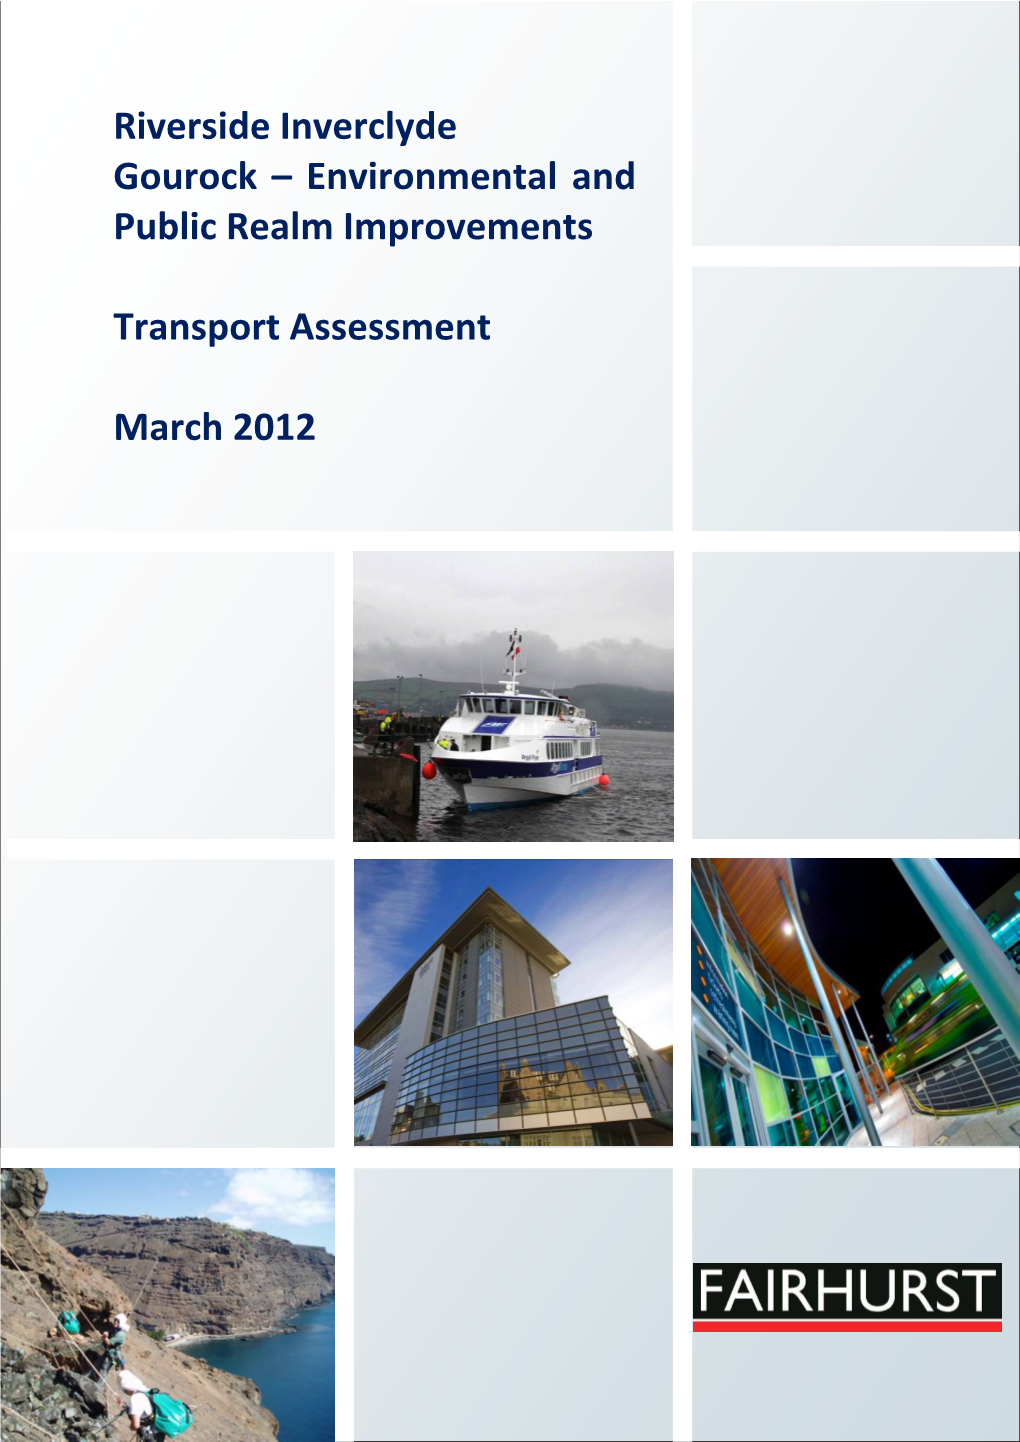 Riverside Inverclyde Gourock – Environmental and Public Realm Improvements Transport Assessment March 2012